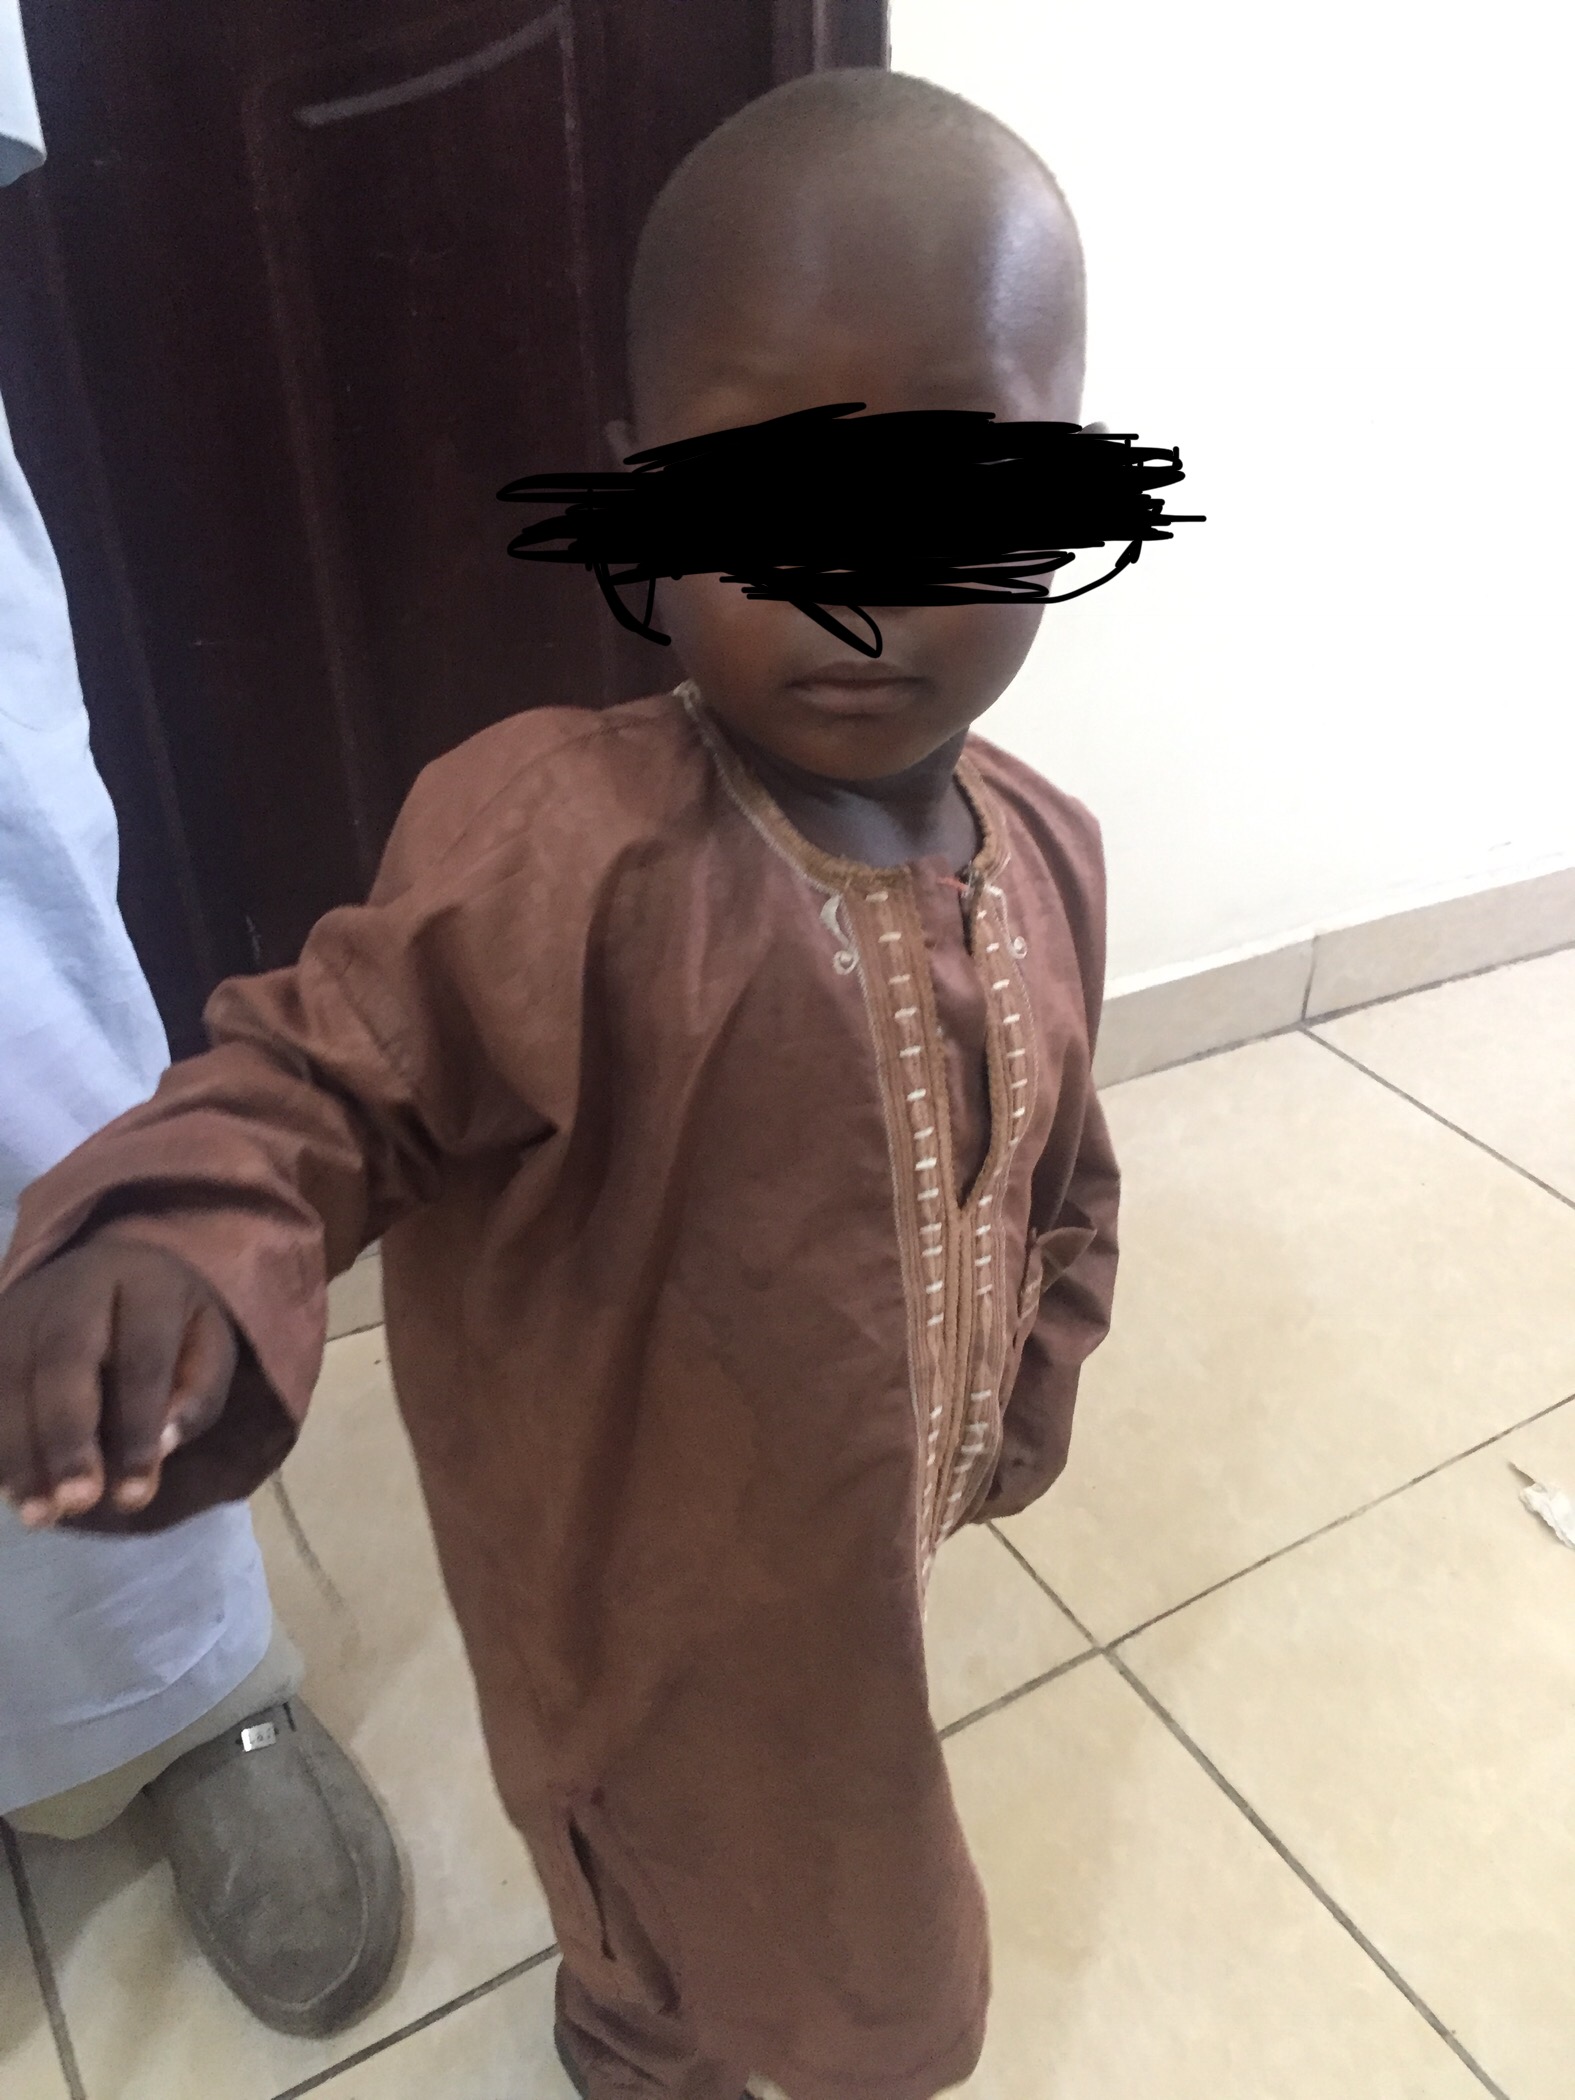 Malnutrition: How RUTF saved 3 year old Borno community boy from dying